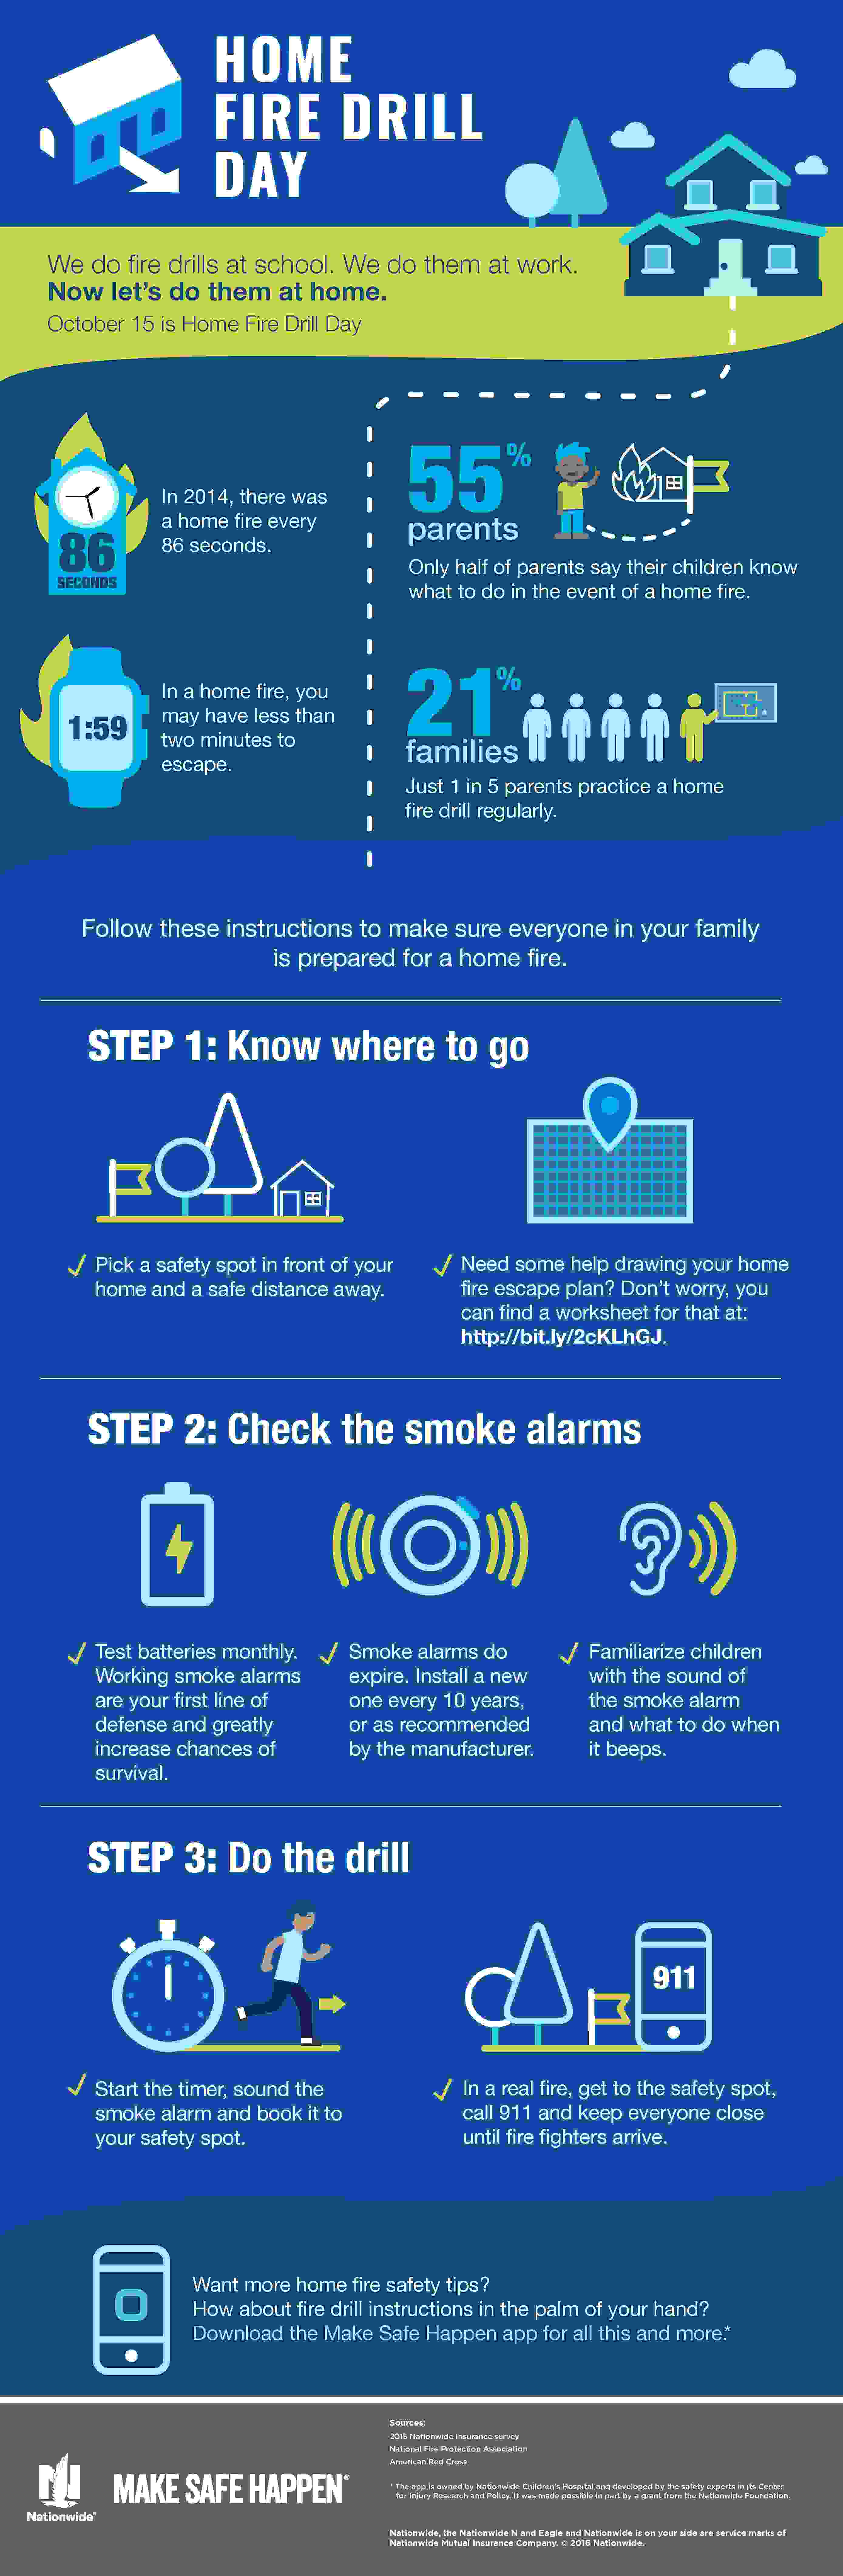 Home Fire Drill Safety Infographic